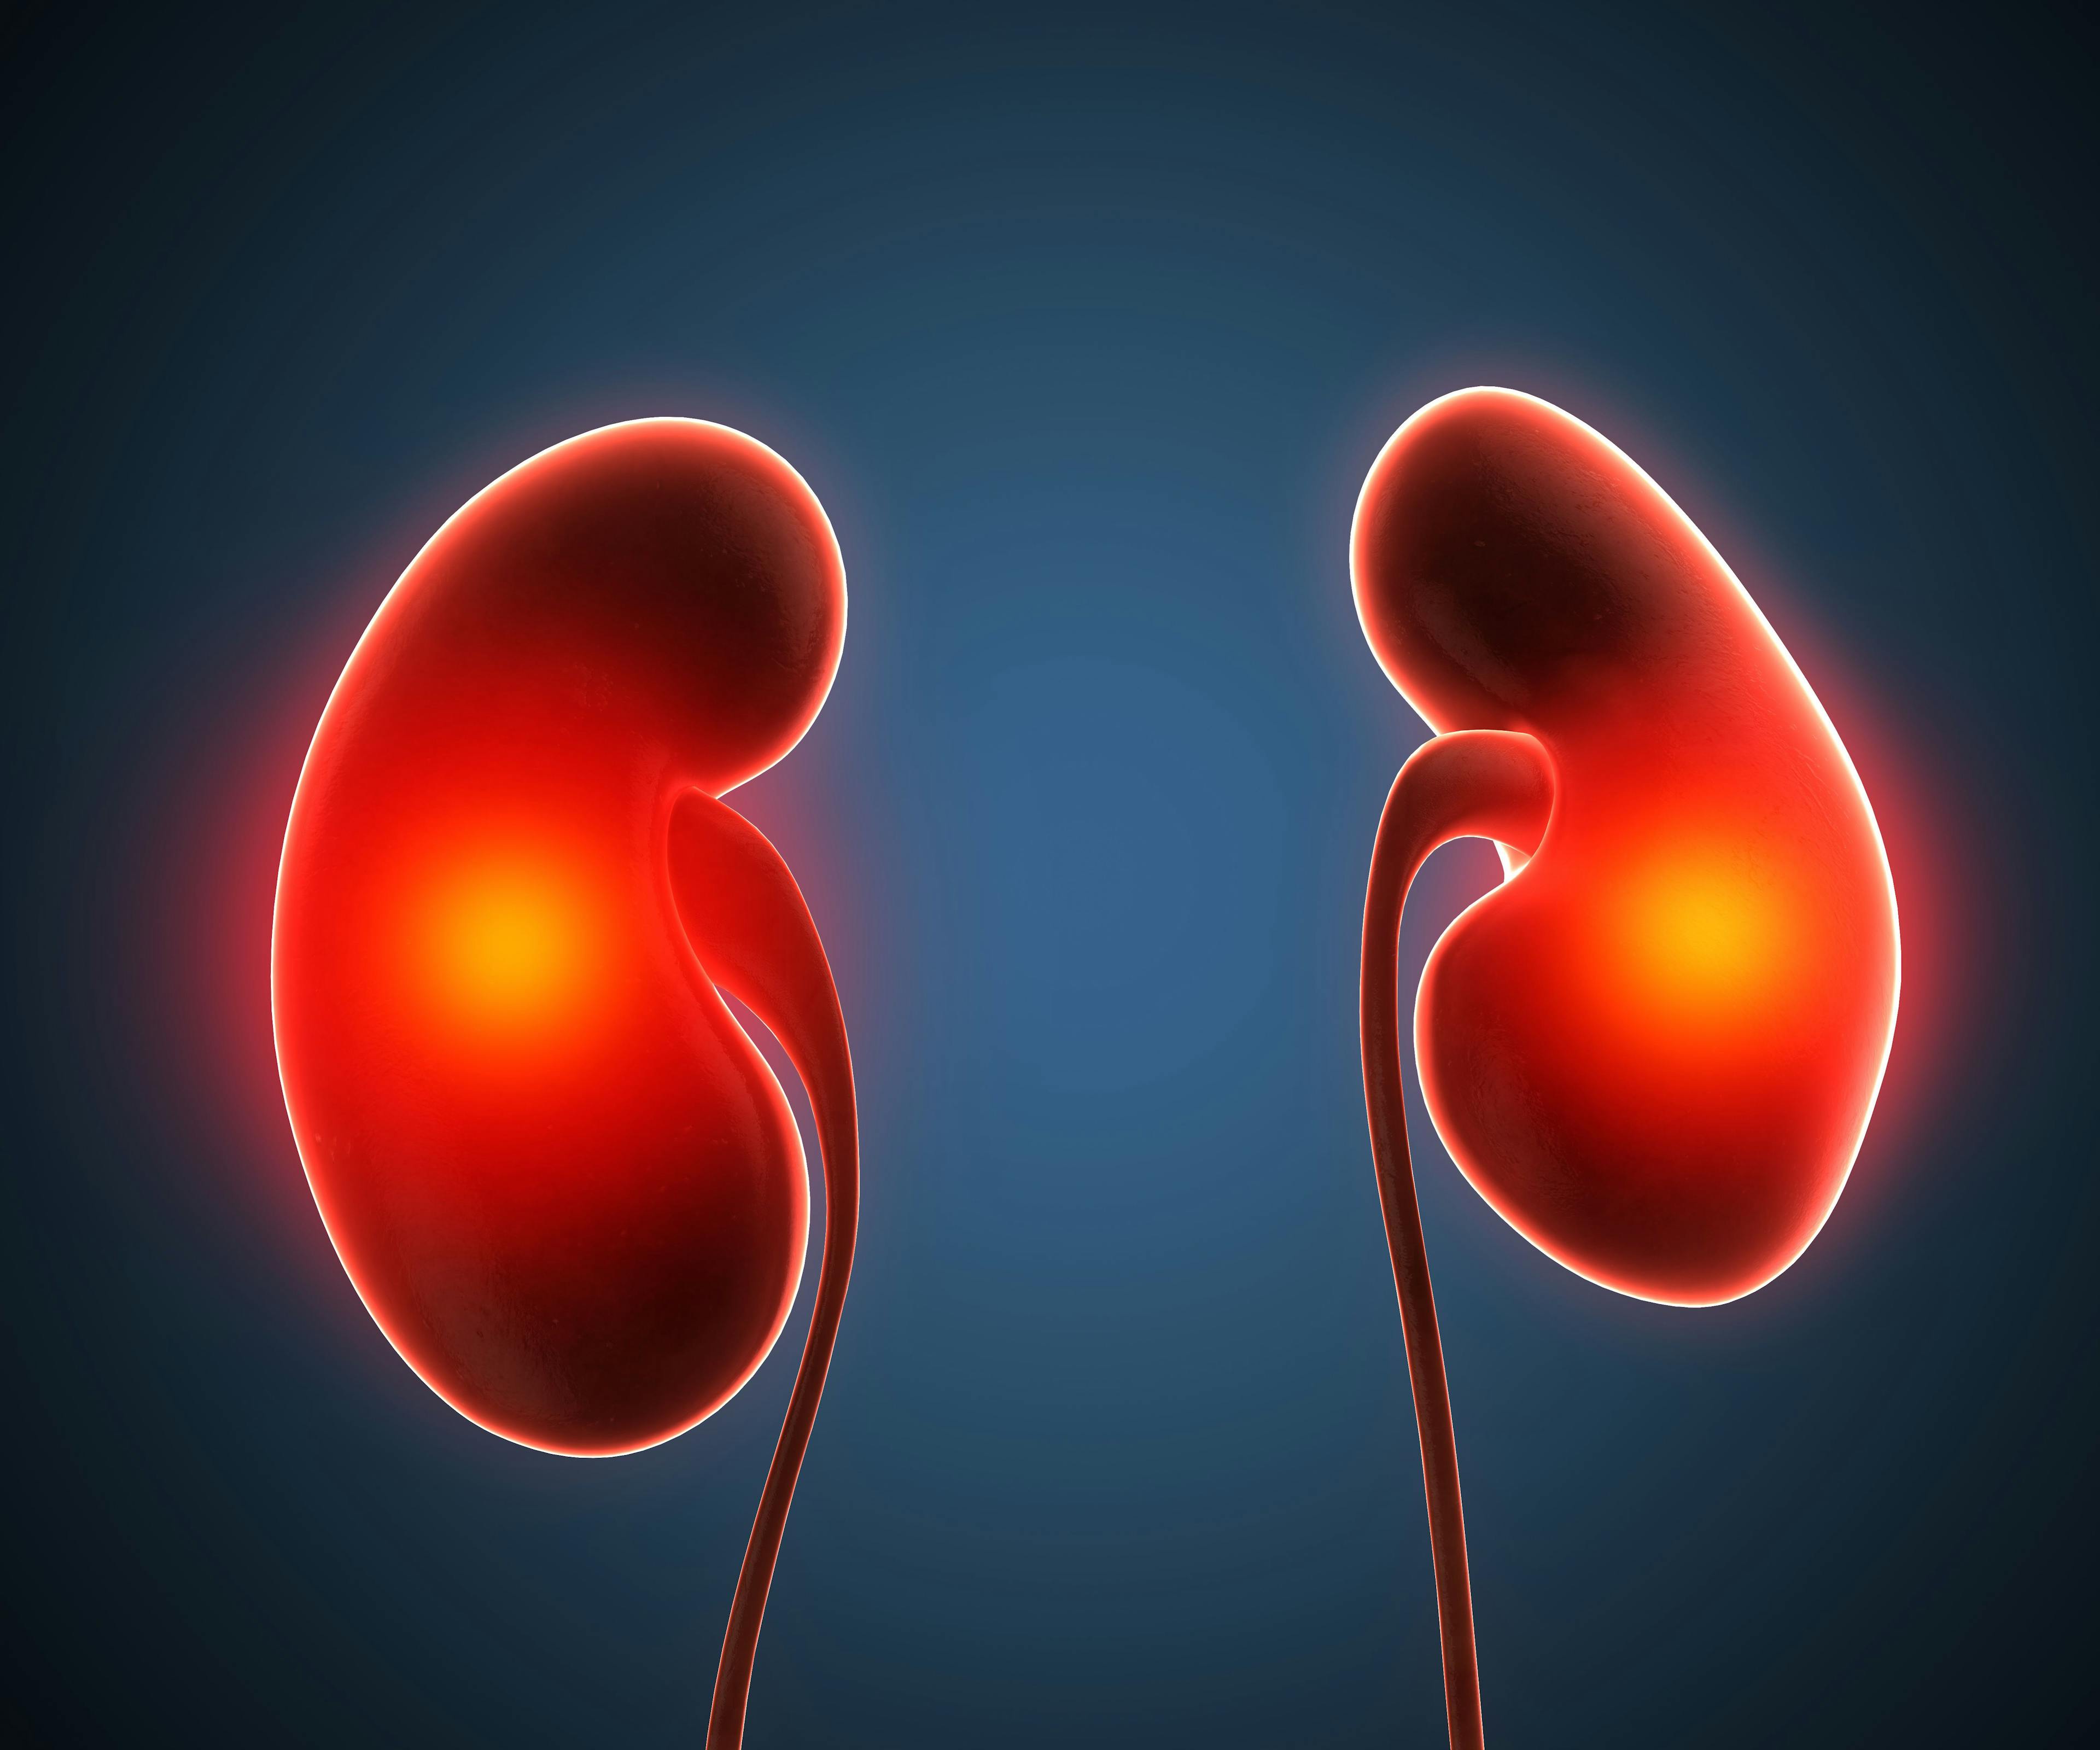 Top 5 Kidney Cancer Articles From 2021